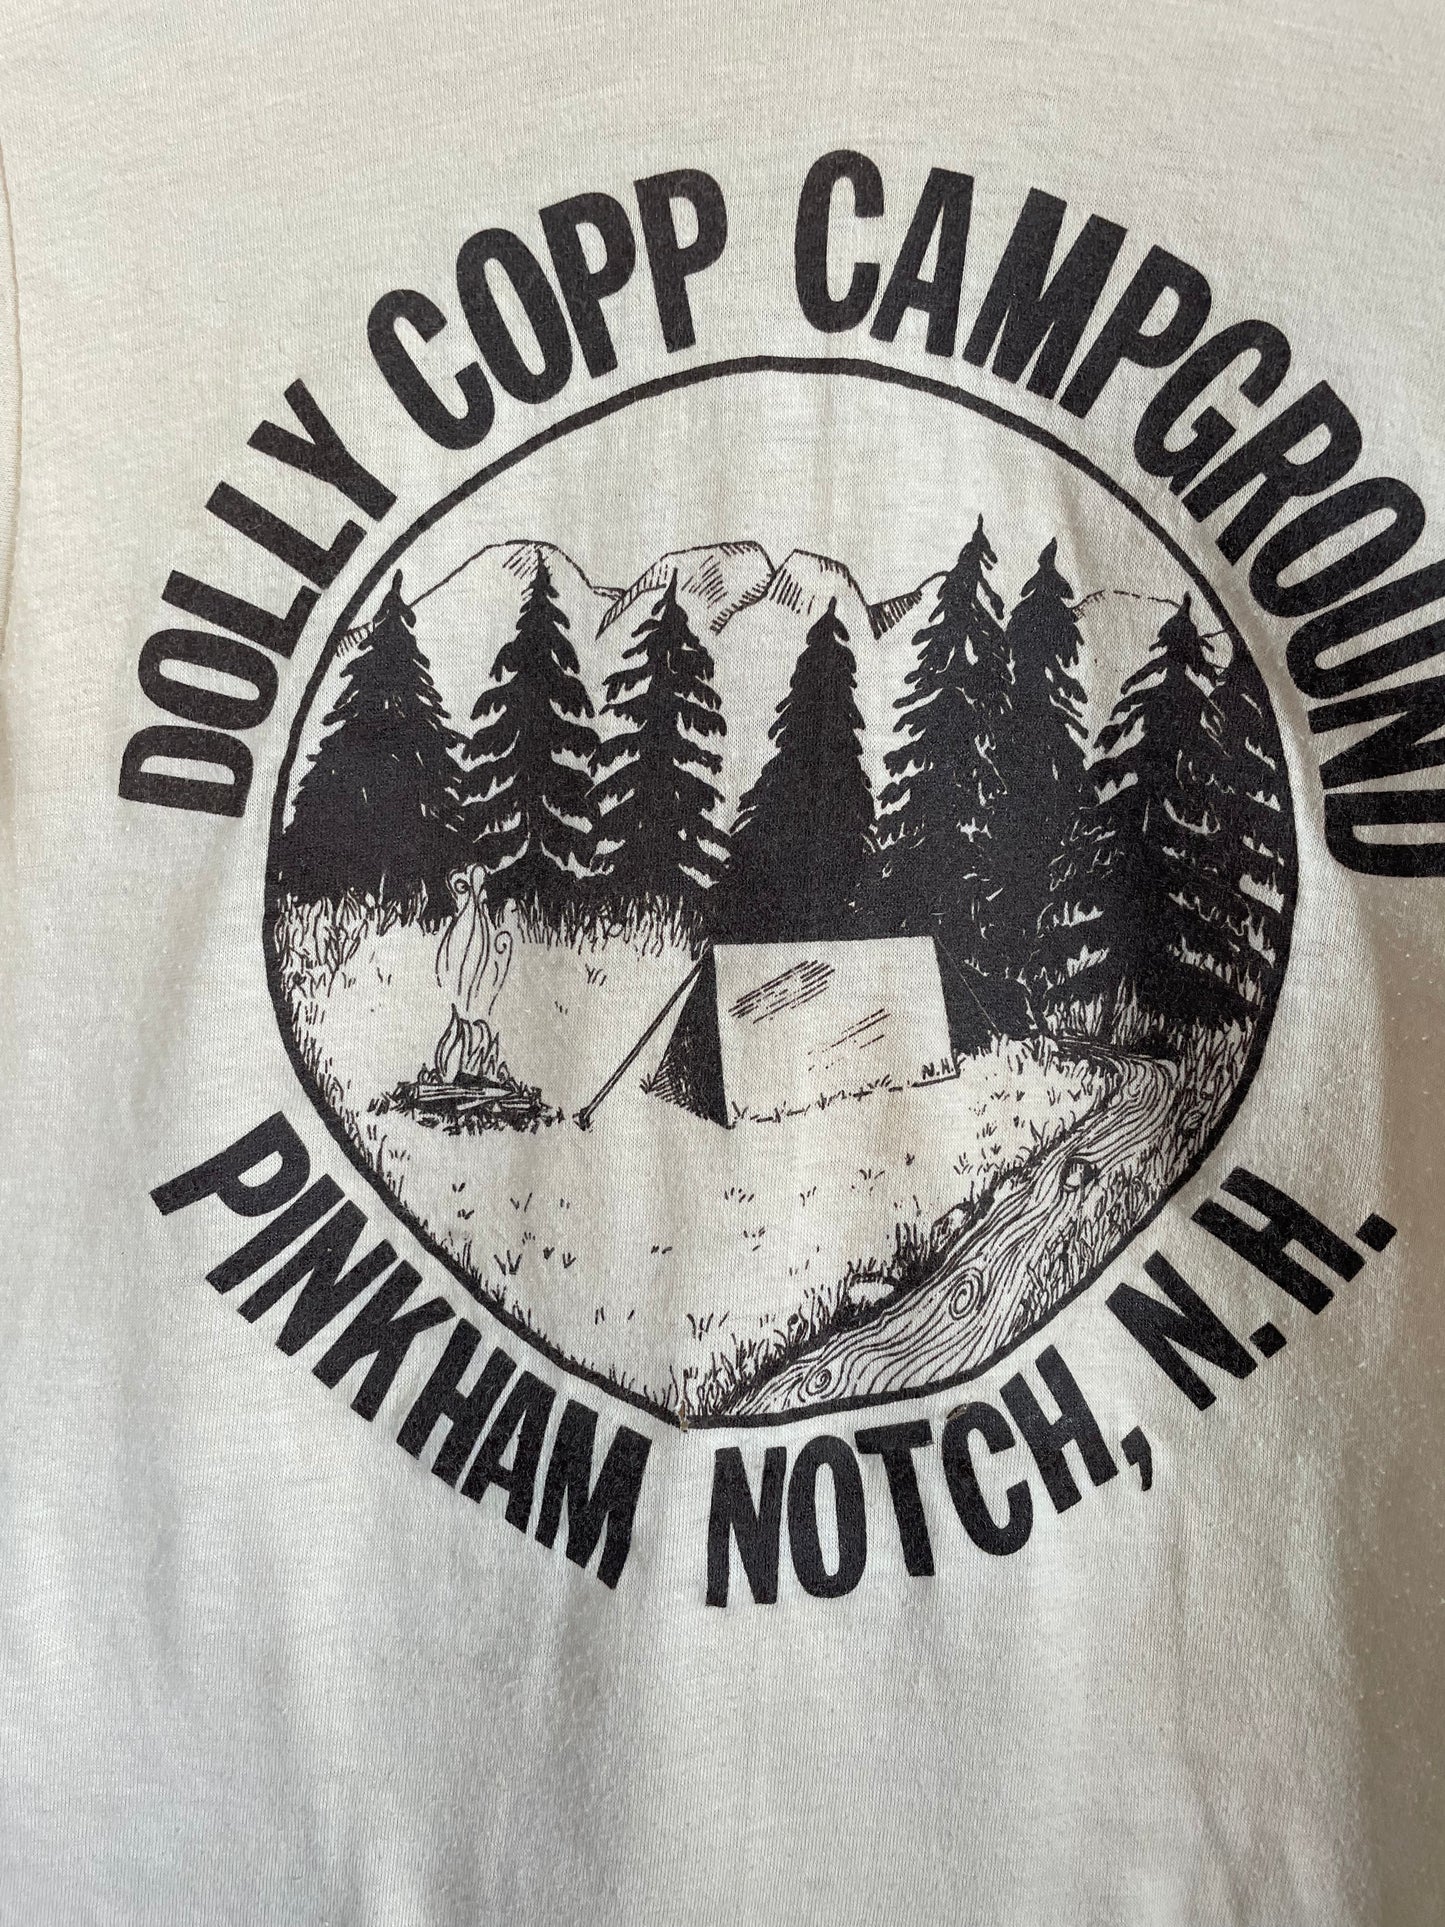 80s Dolly Copp Campground, Pinkham Notch, NH Tee